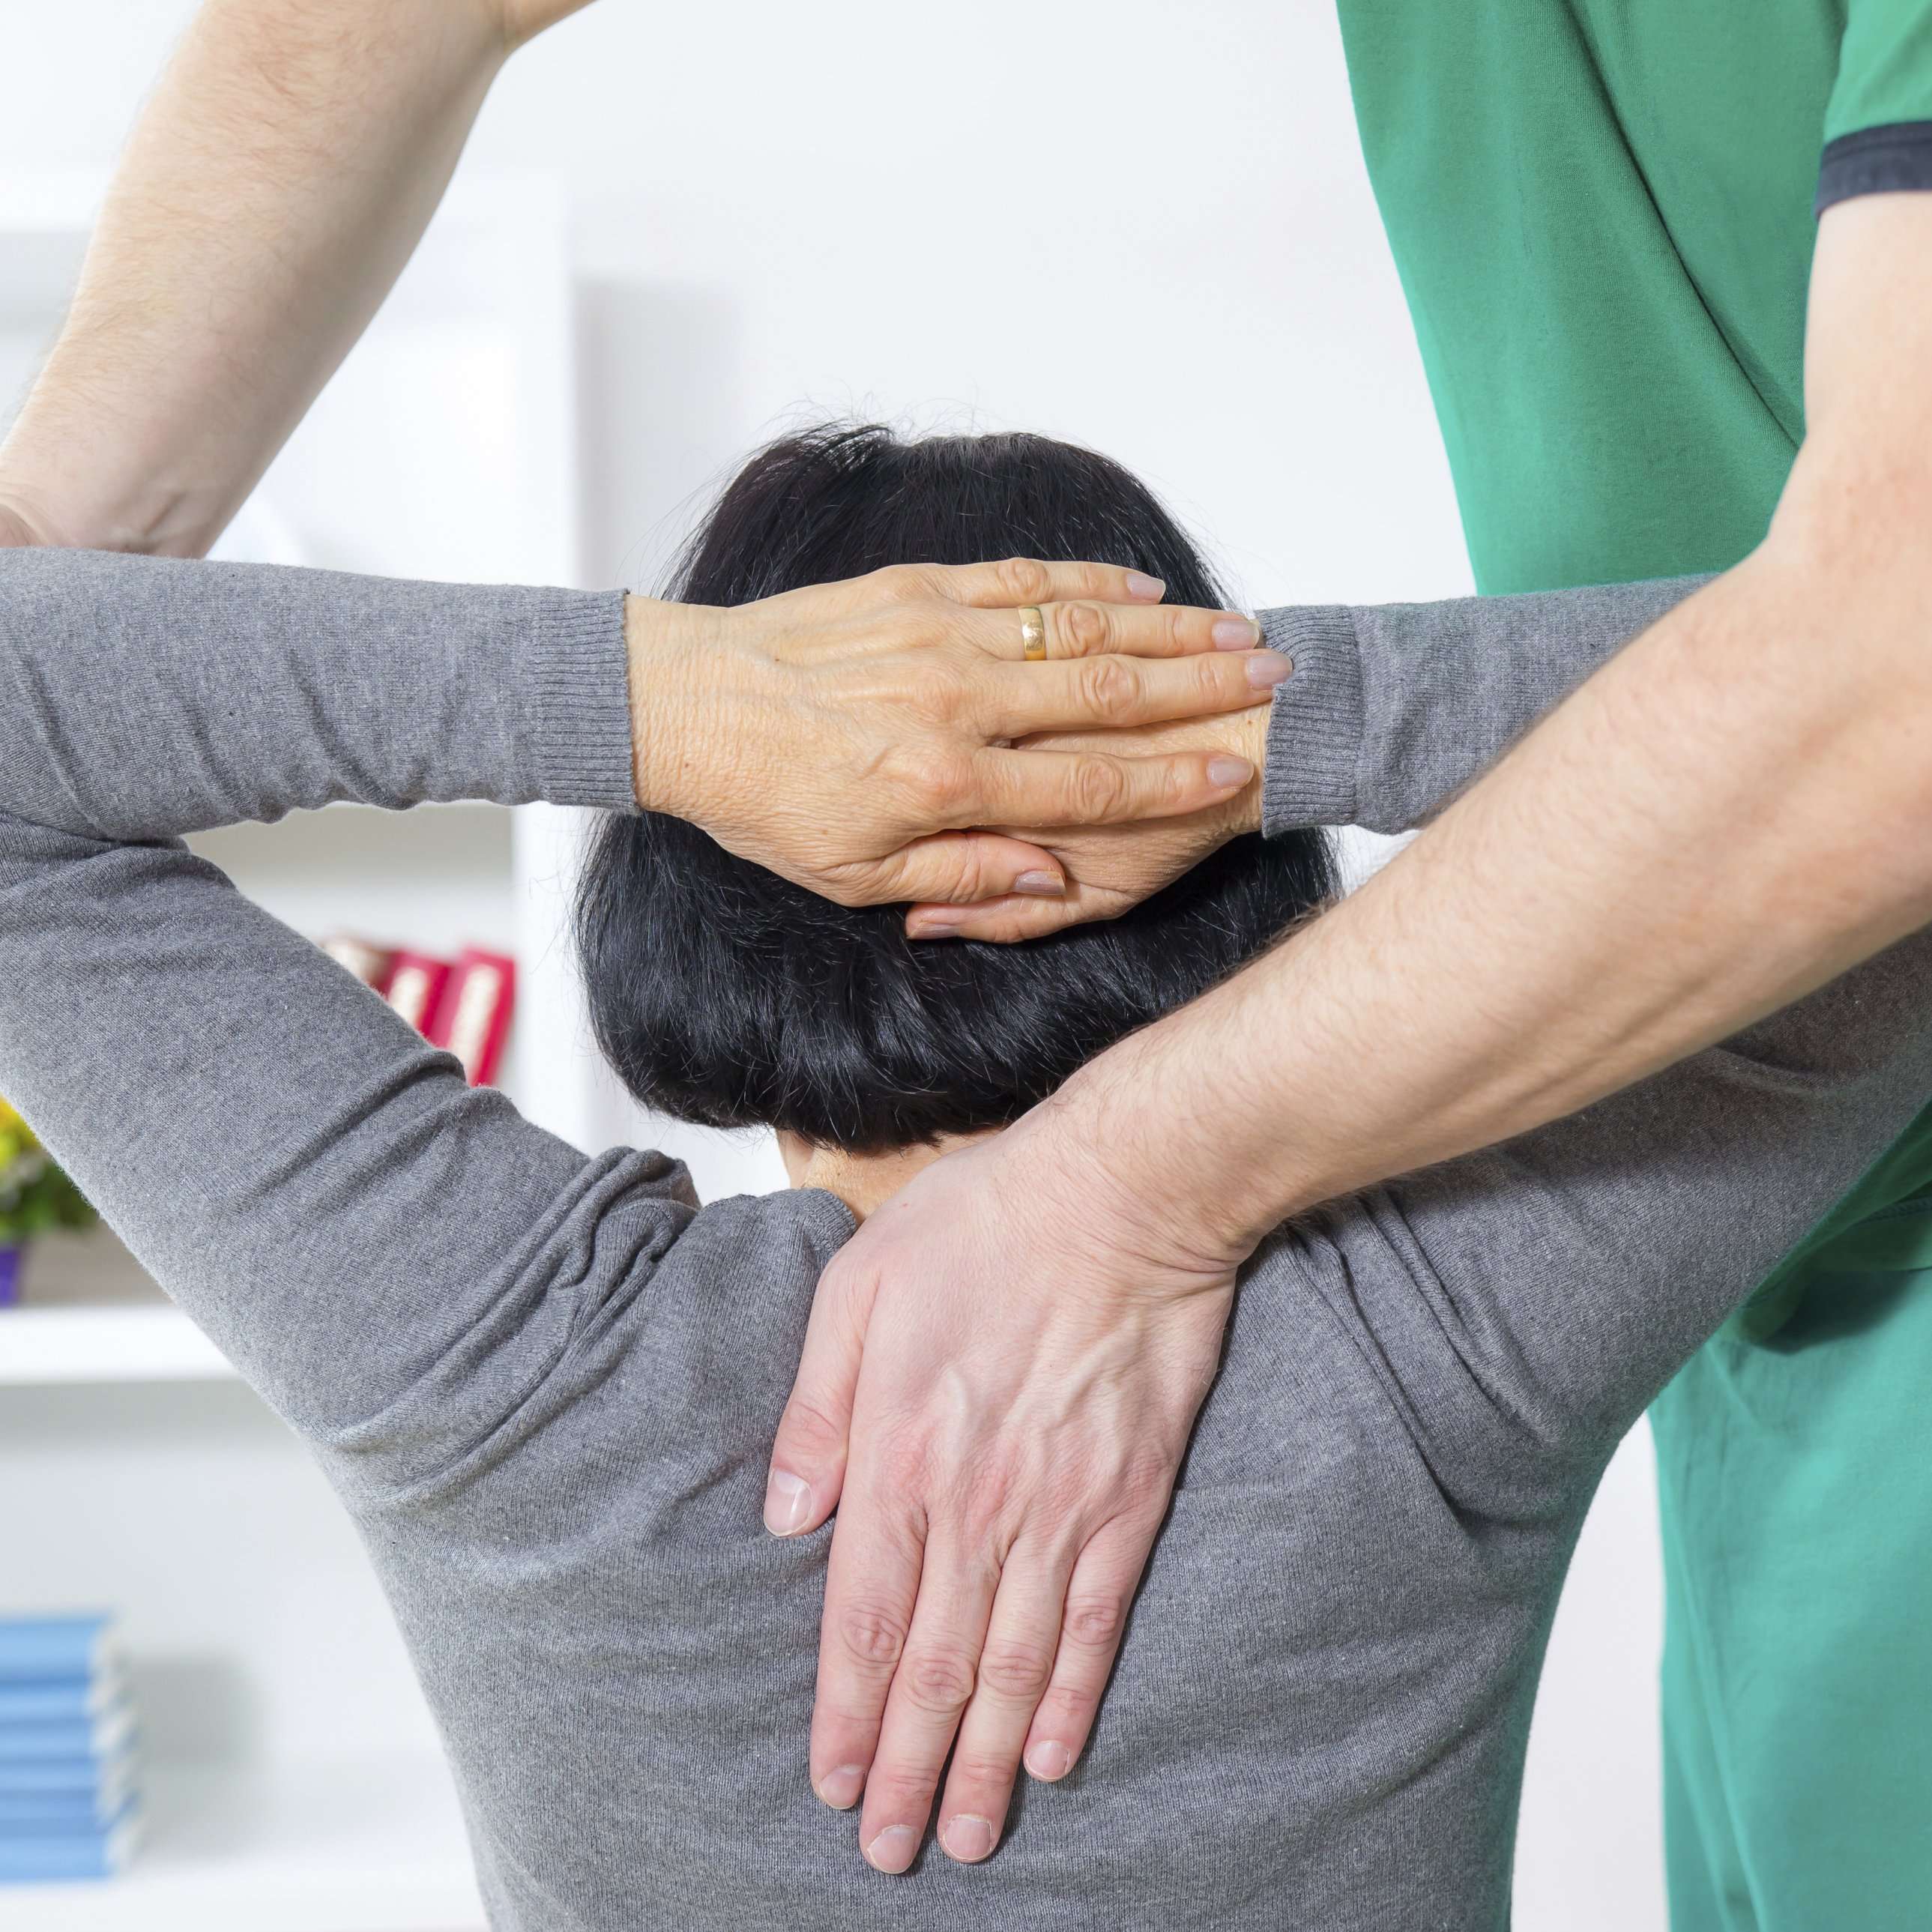 image for TIL that Chiropractors are not a type of medical doctor, cannot practice medicine, and Chiropractic is a form of alternative medicine like acupuncture.